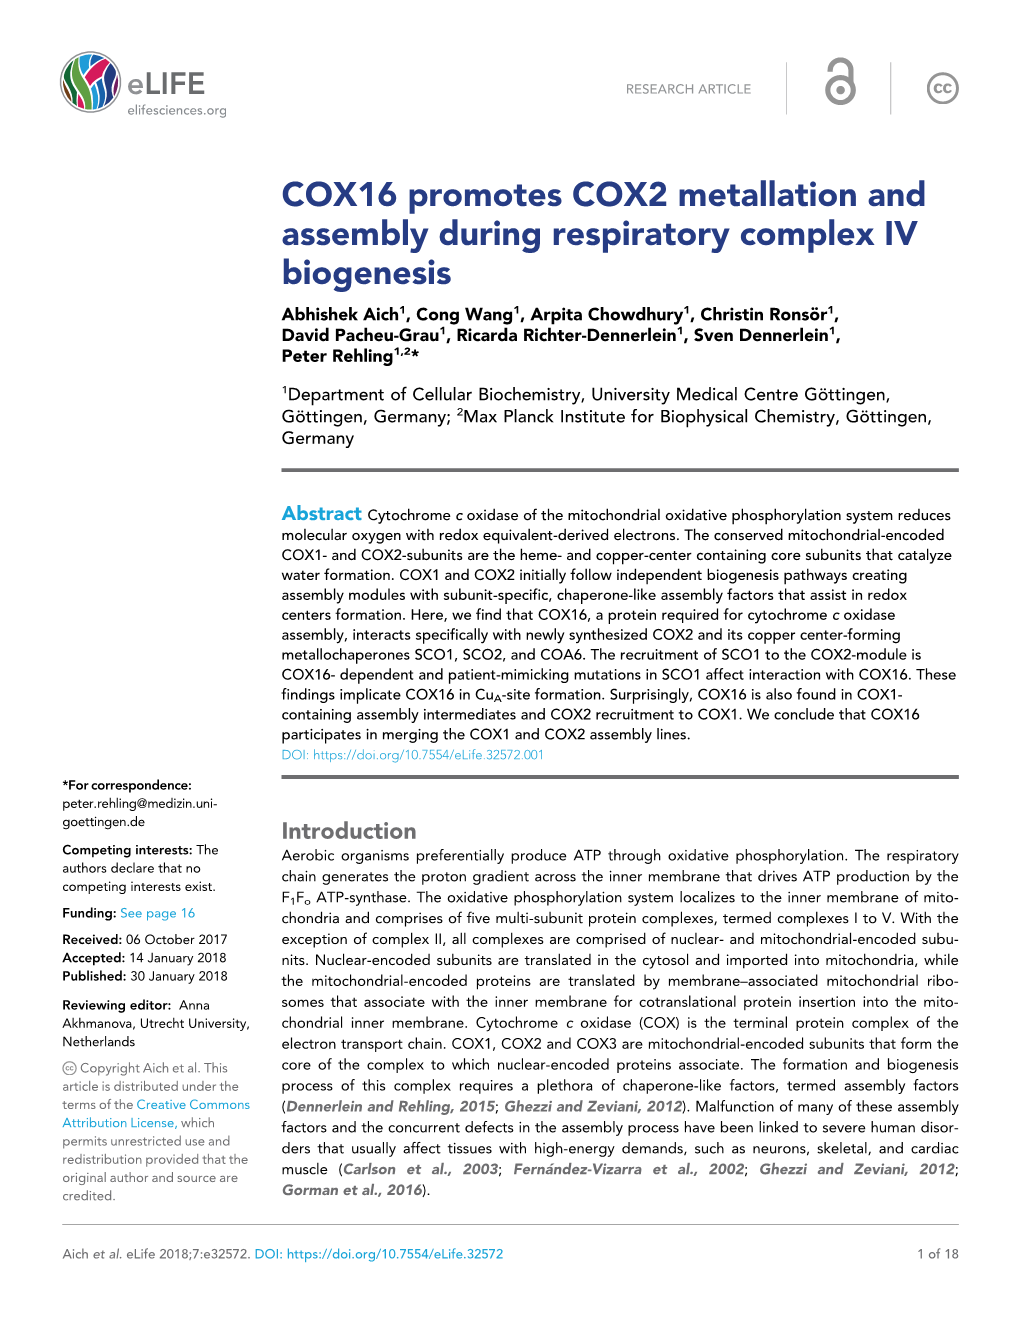 COX16 Promotes COX2 Metallation and Assembly During Respiratory